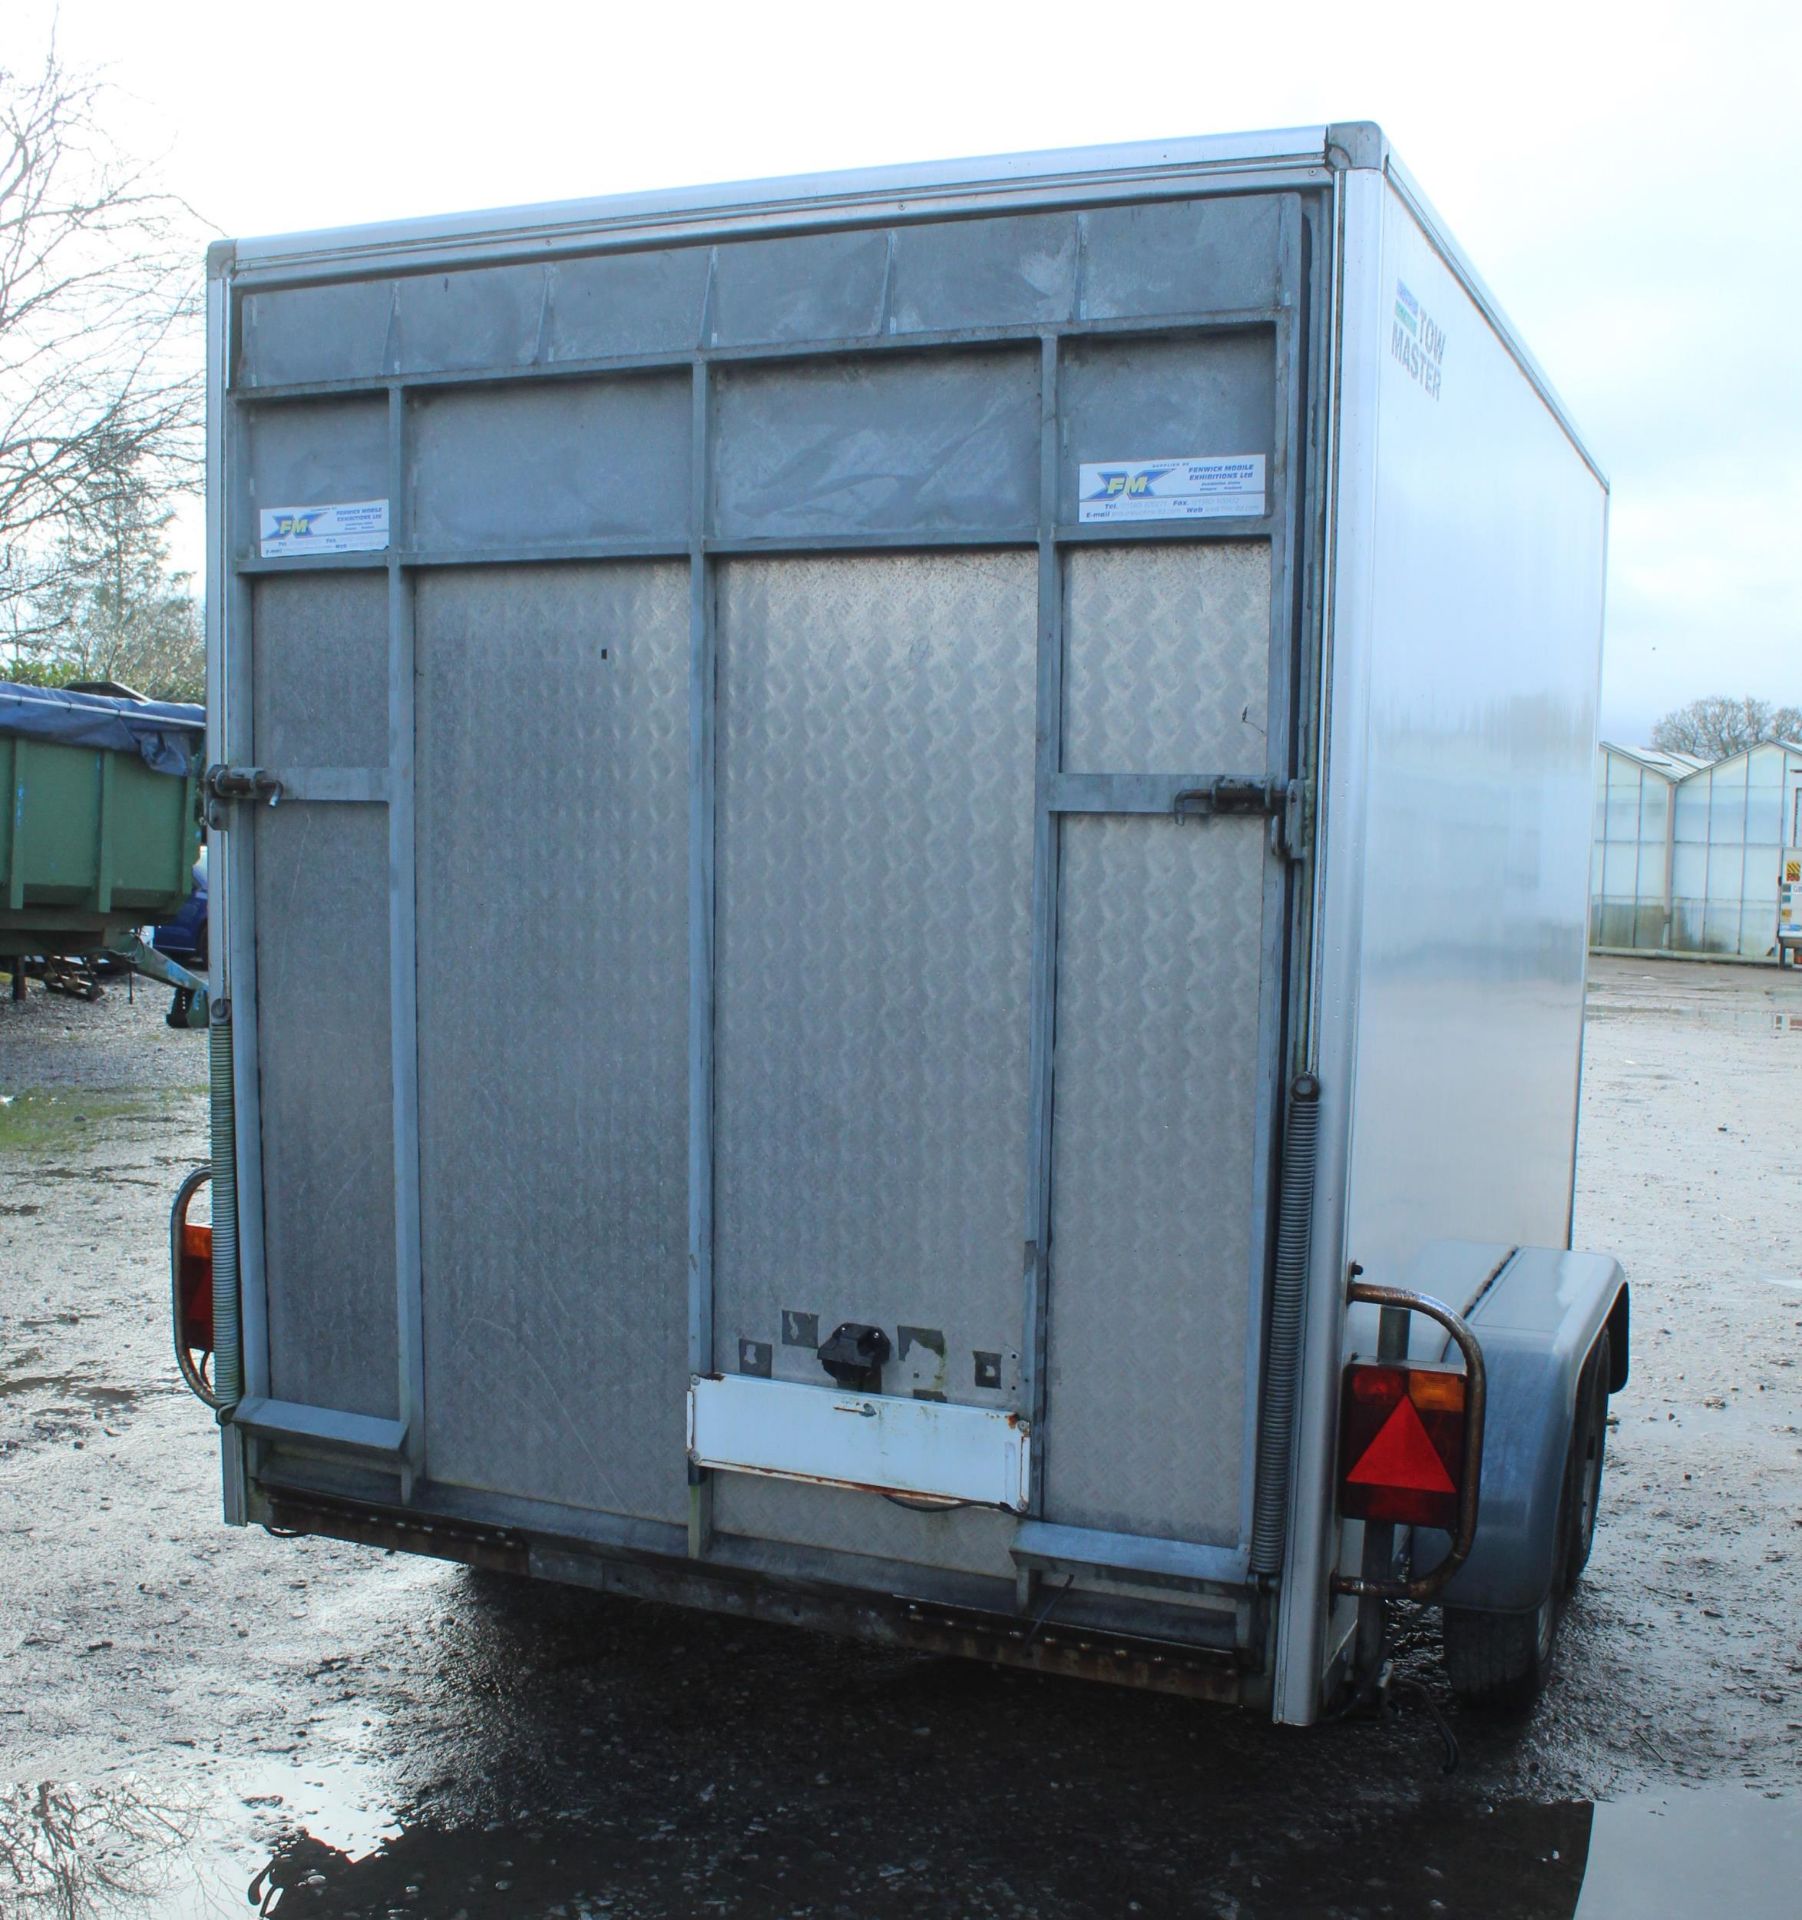 TOW MASTER TWIN AXLE BOX TRAILER 2600KG GROSS SERIAL NUMBER TM080720 NO VAT - Image 3 of 4